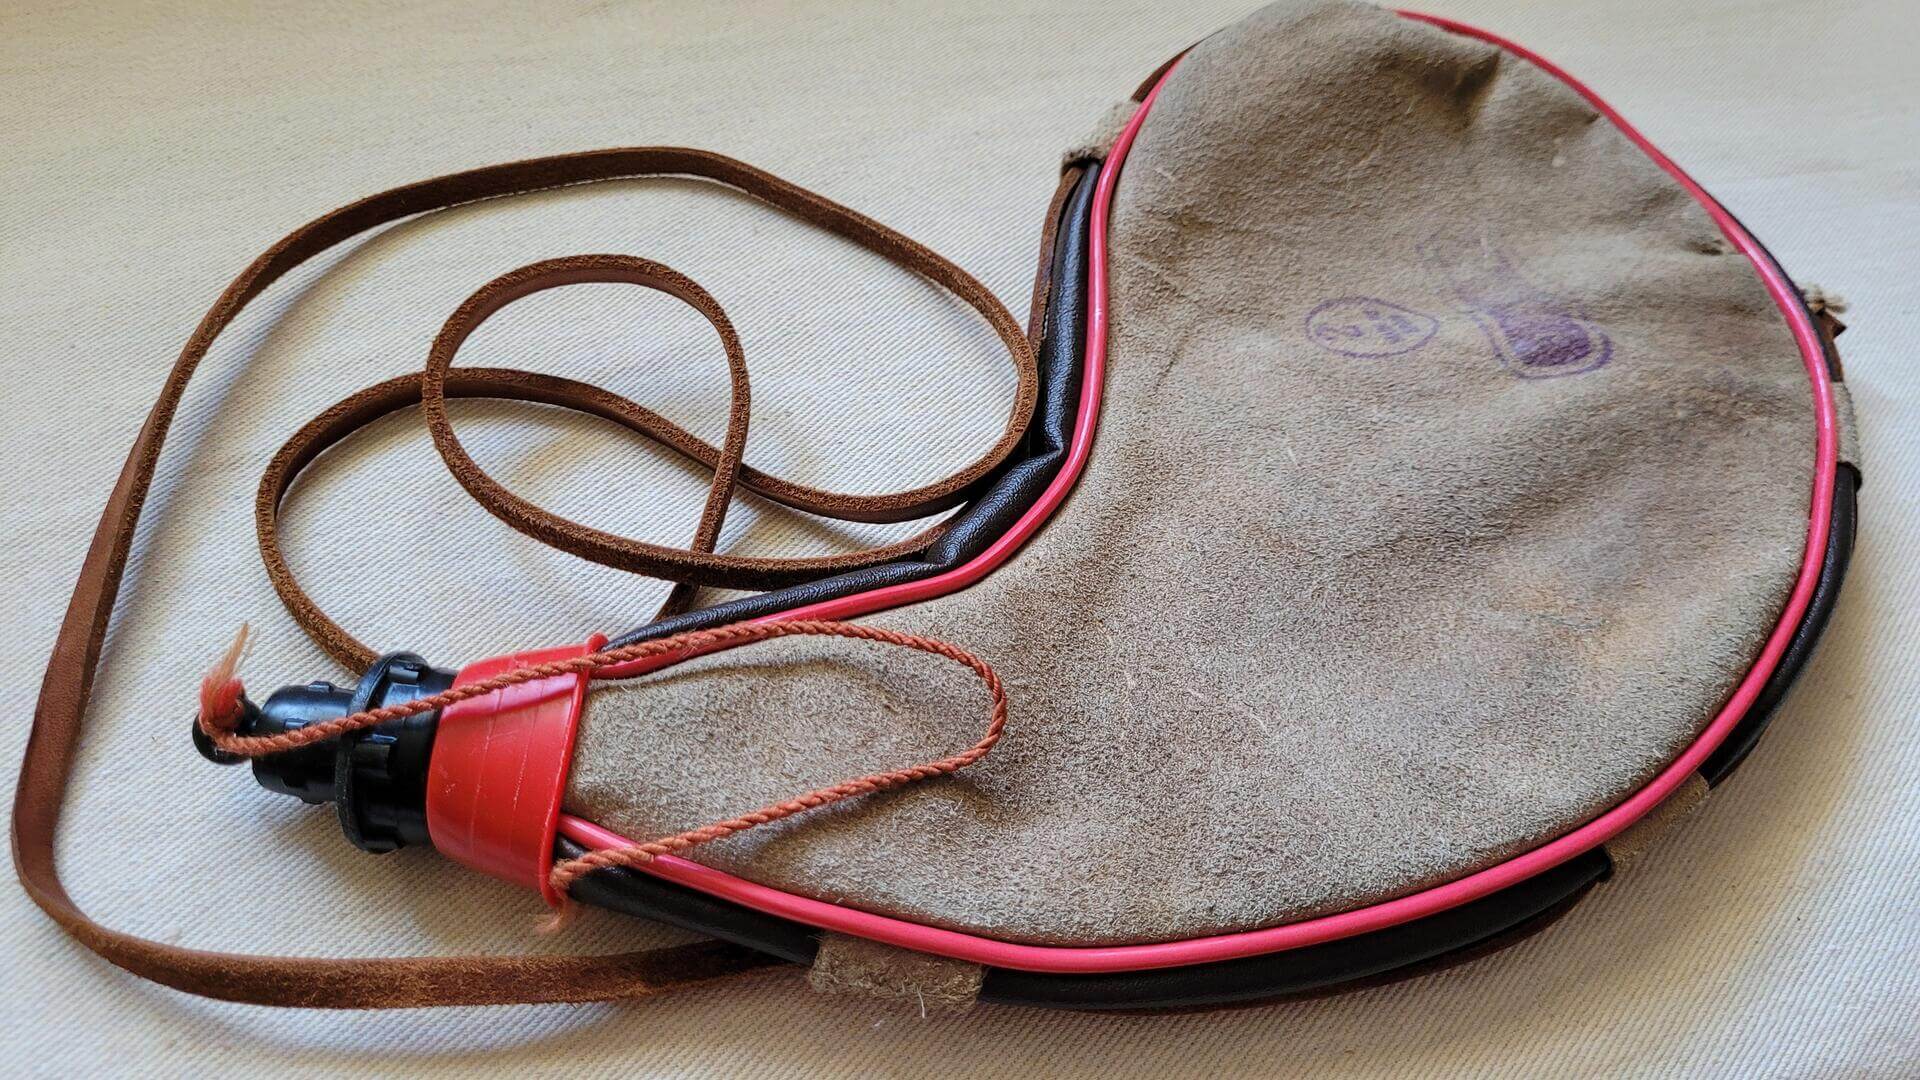 Vintage Hide Bota Bag Water Canteen Wineskin with leather strap - Made in Spain antique collectible camping and hiking equipment